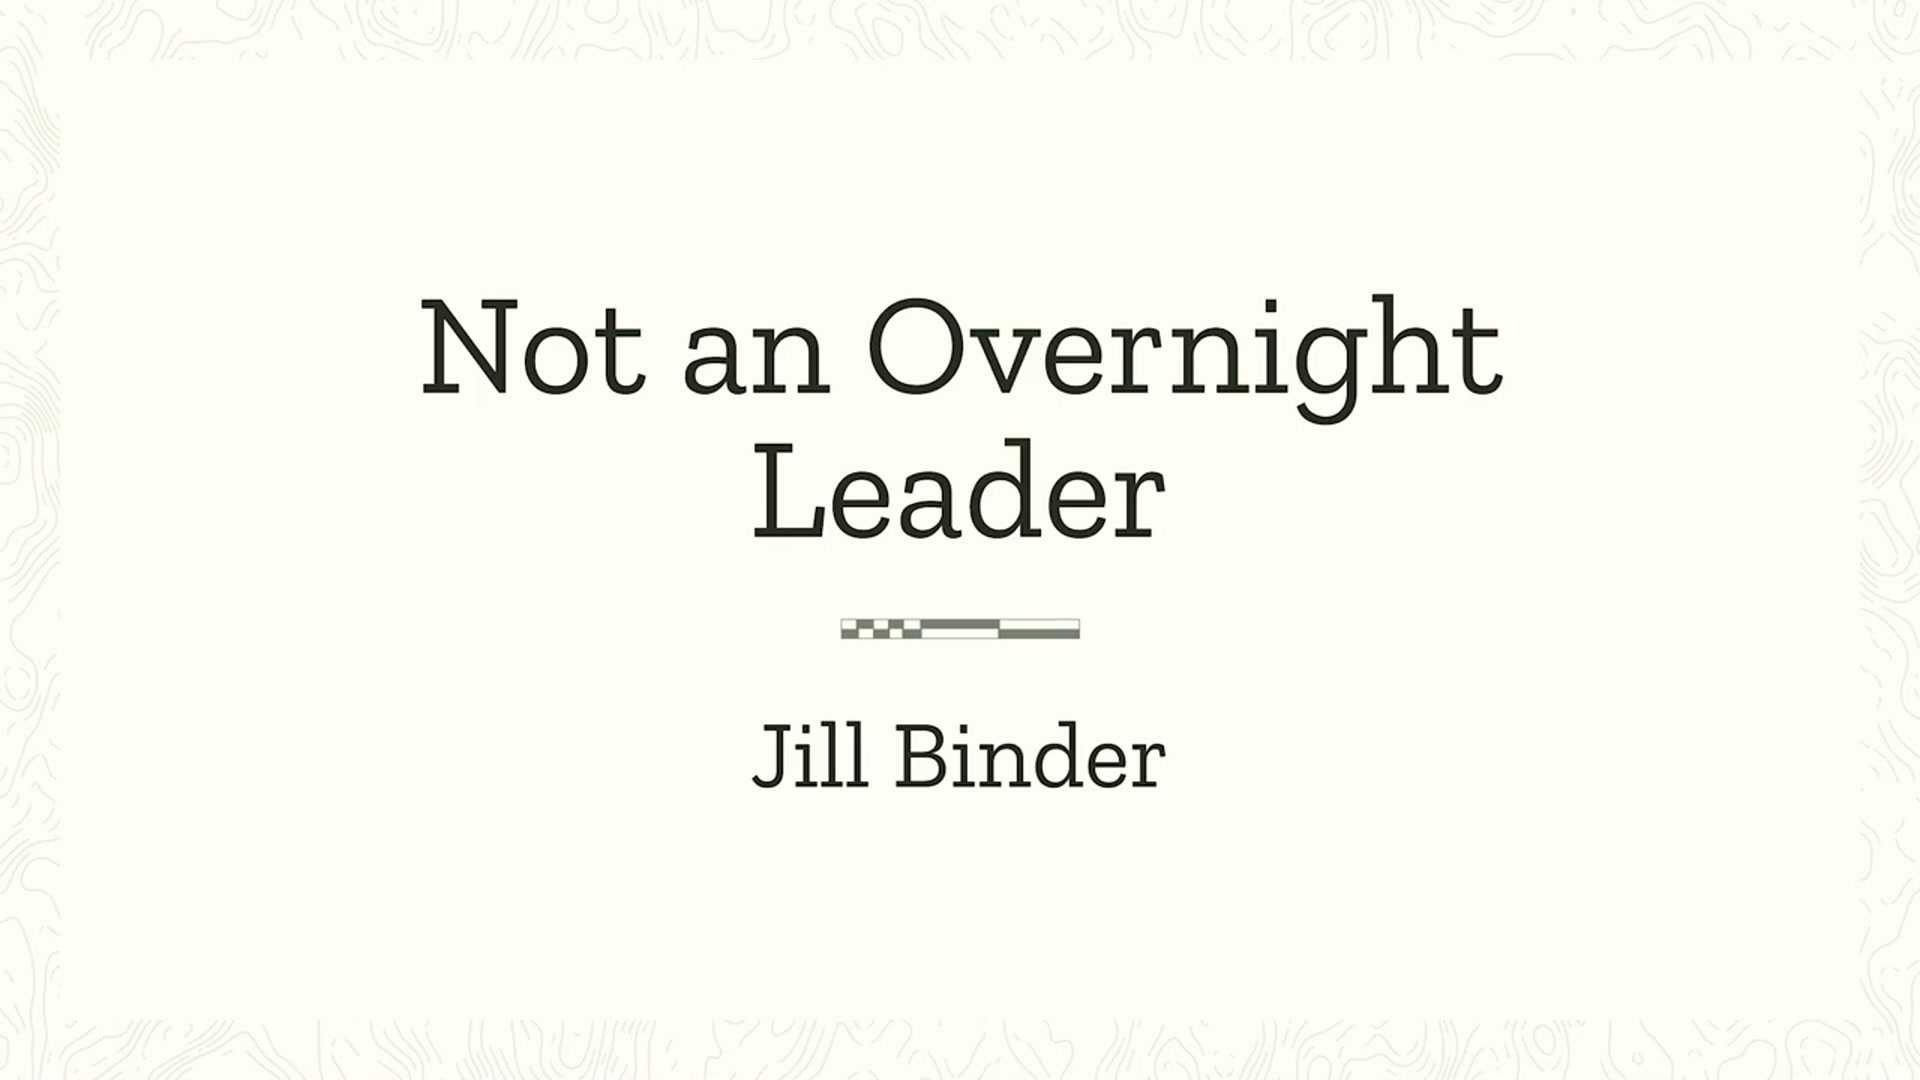 Jill Binder: Not an overnight leader: a celebration of my ten years of being empowered by WordPress